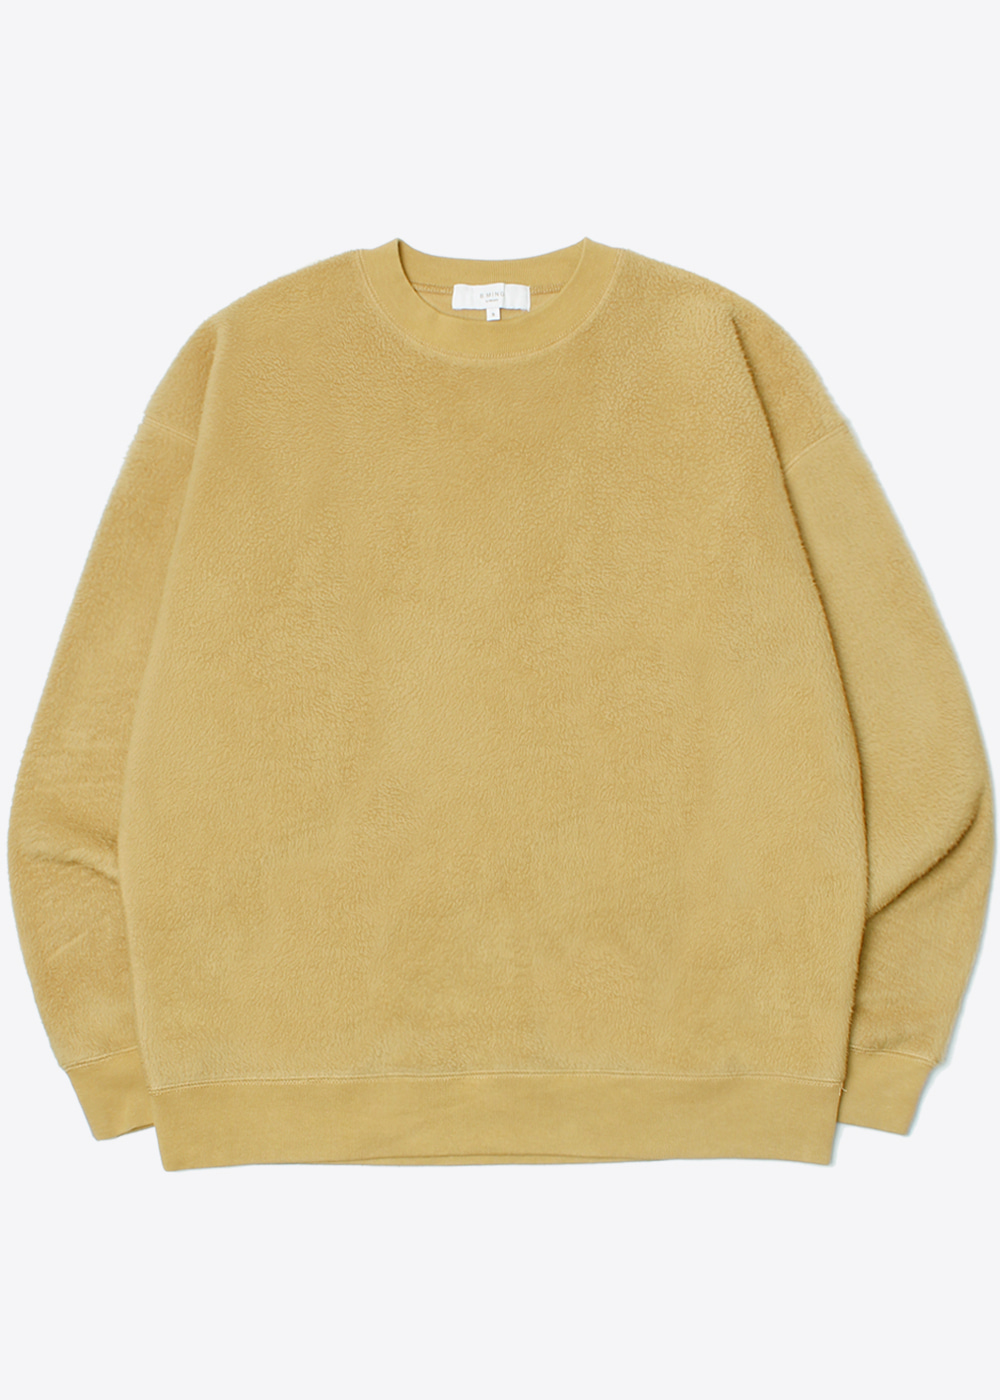 BEAMS’over fit’ pullover fleece